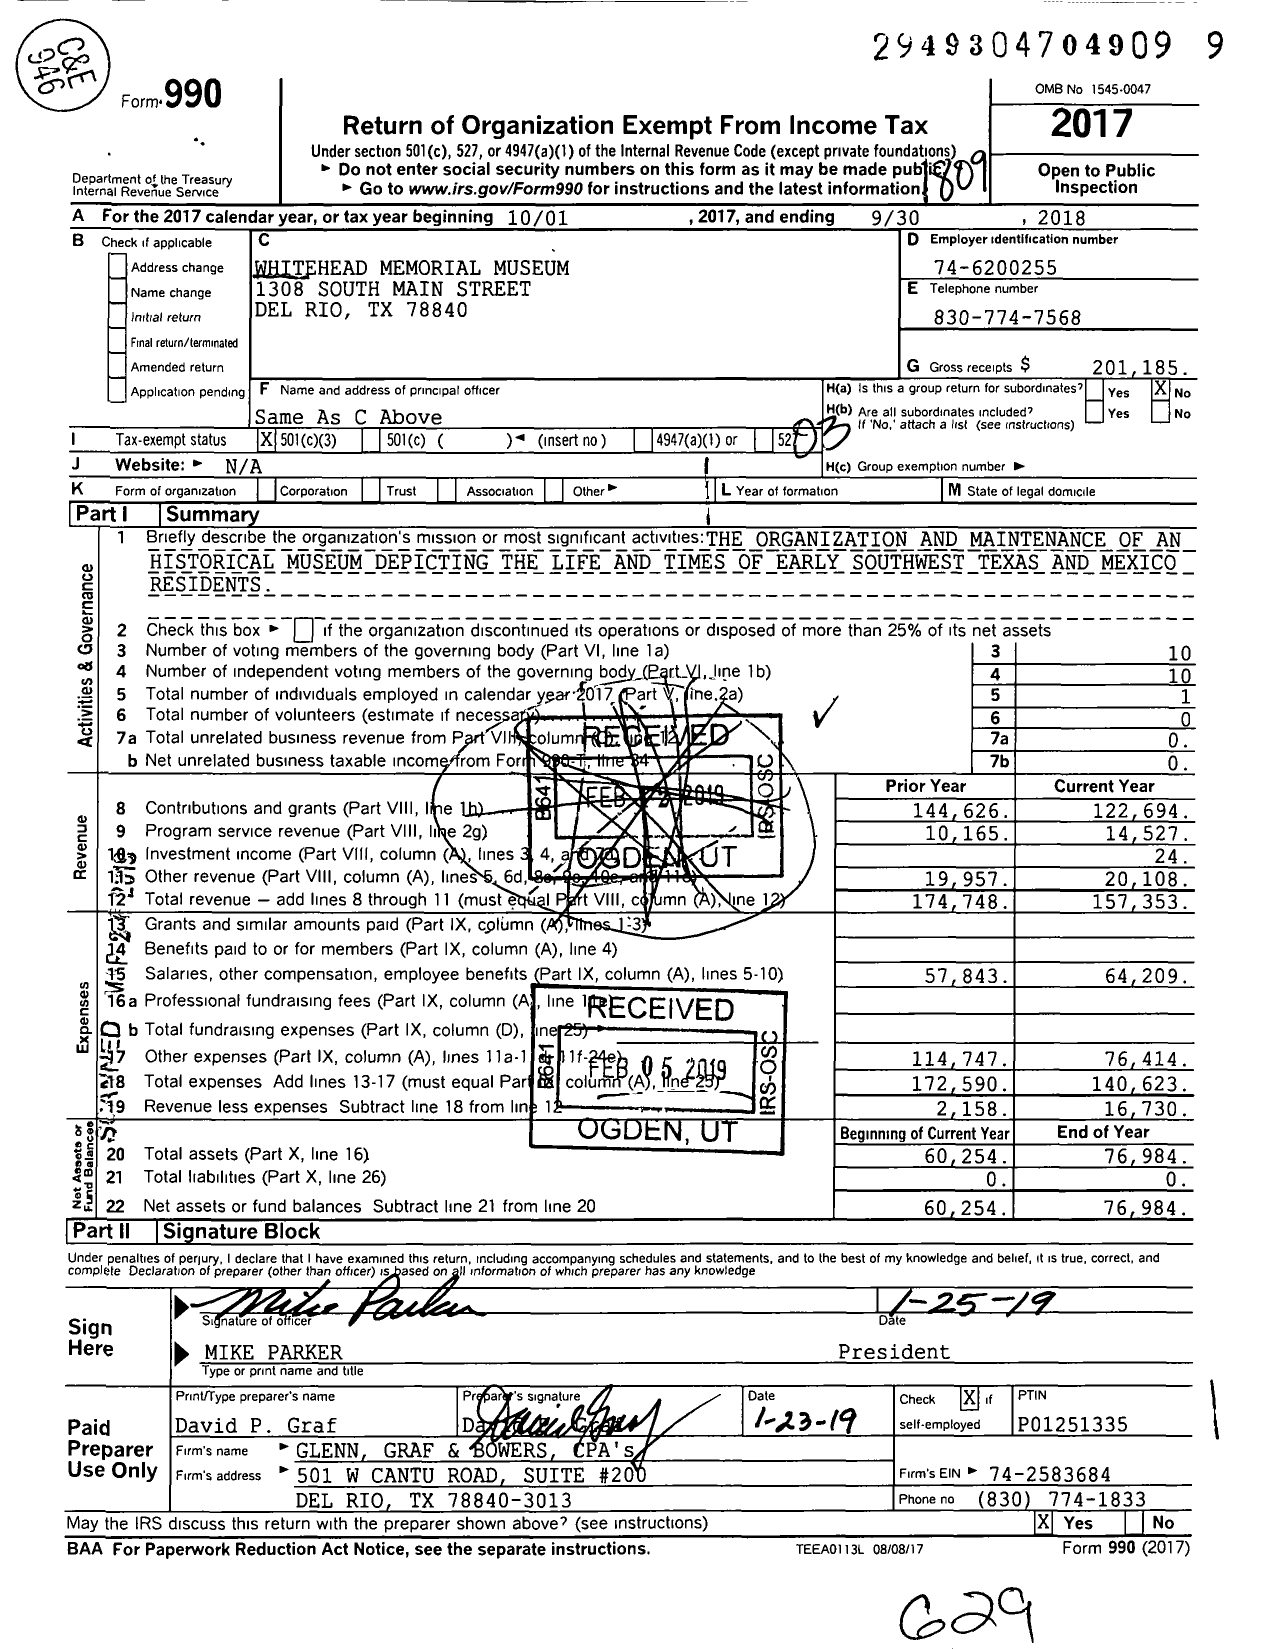 Image of first page of 2017 Form 990 for Whitehead Memorial Museum